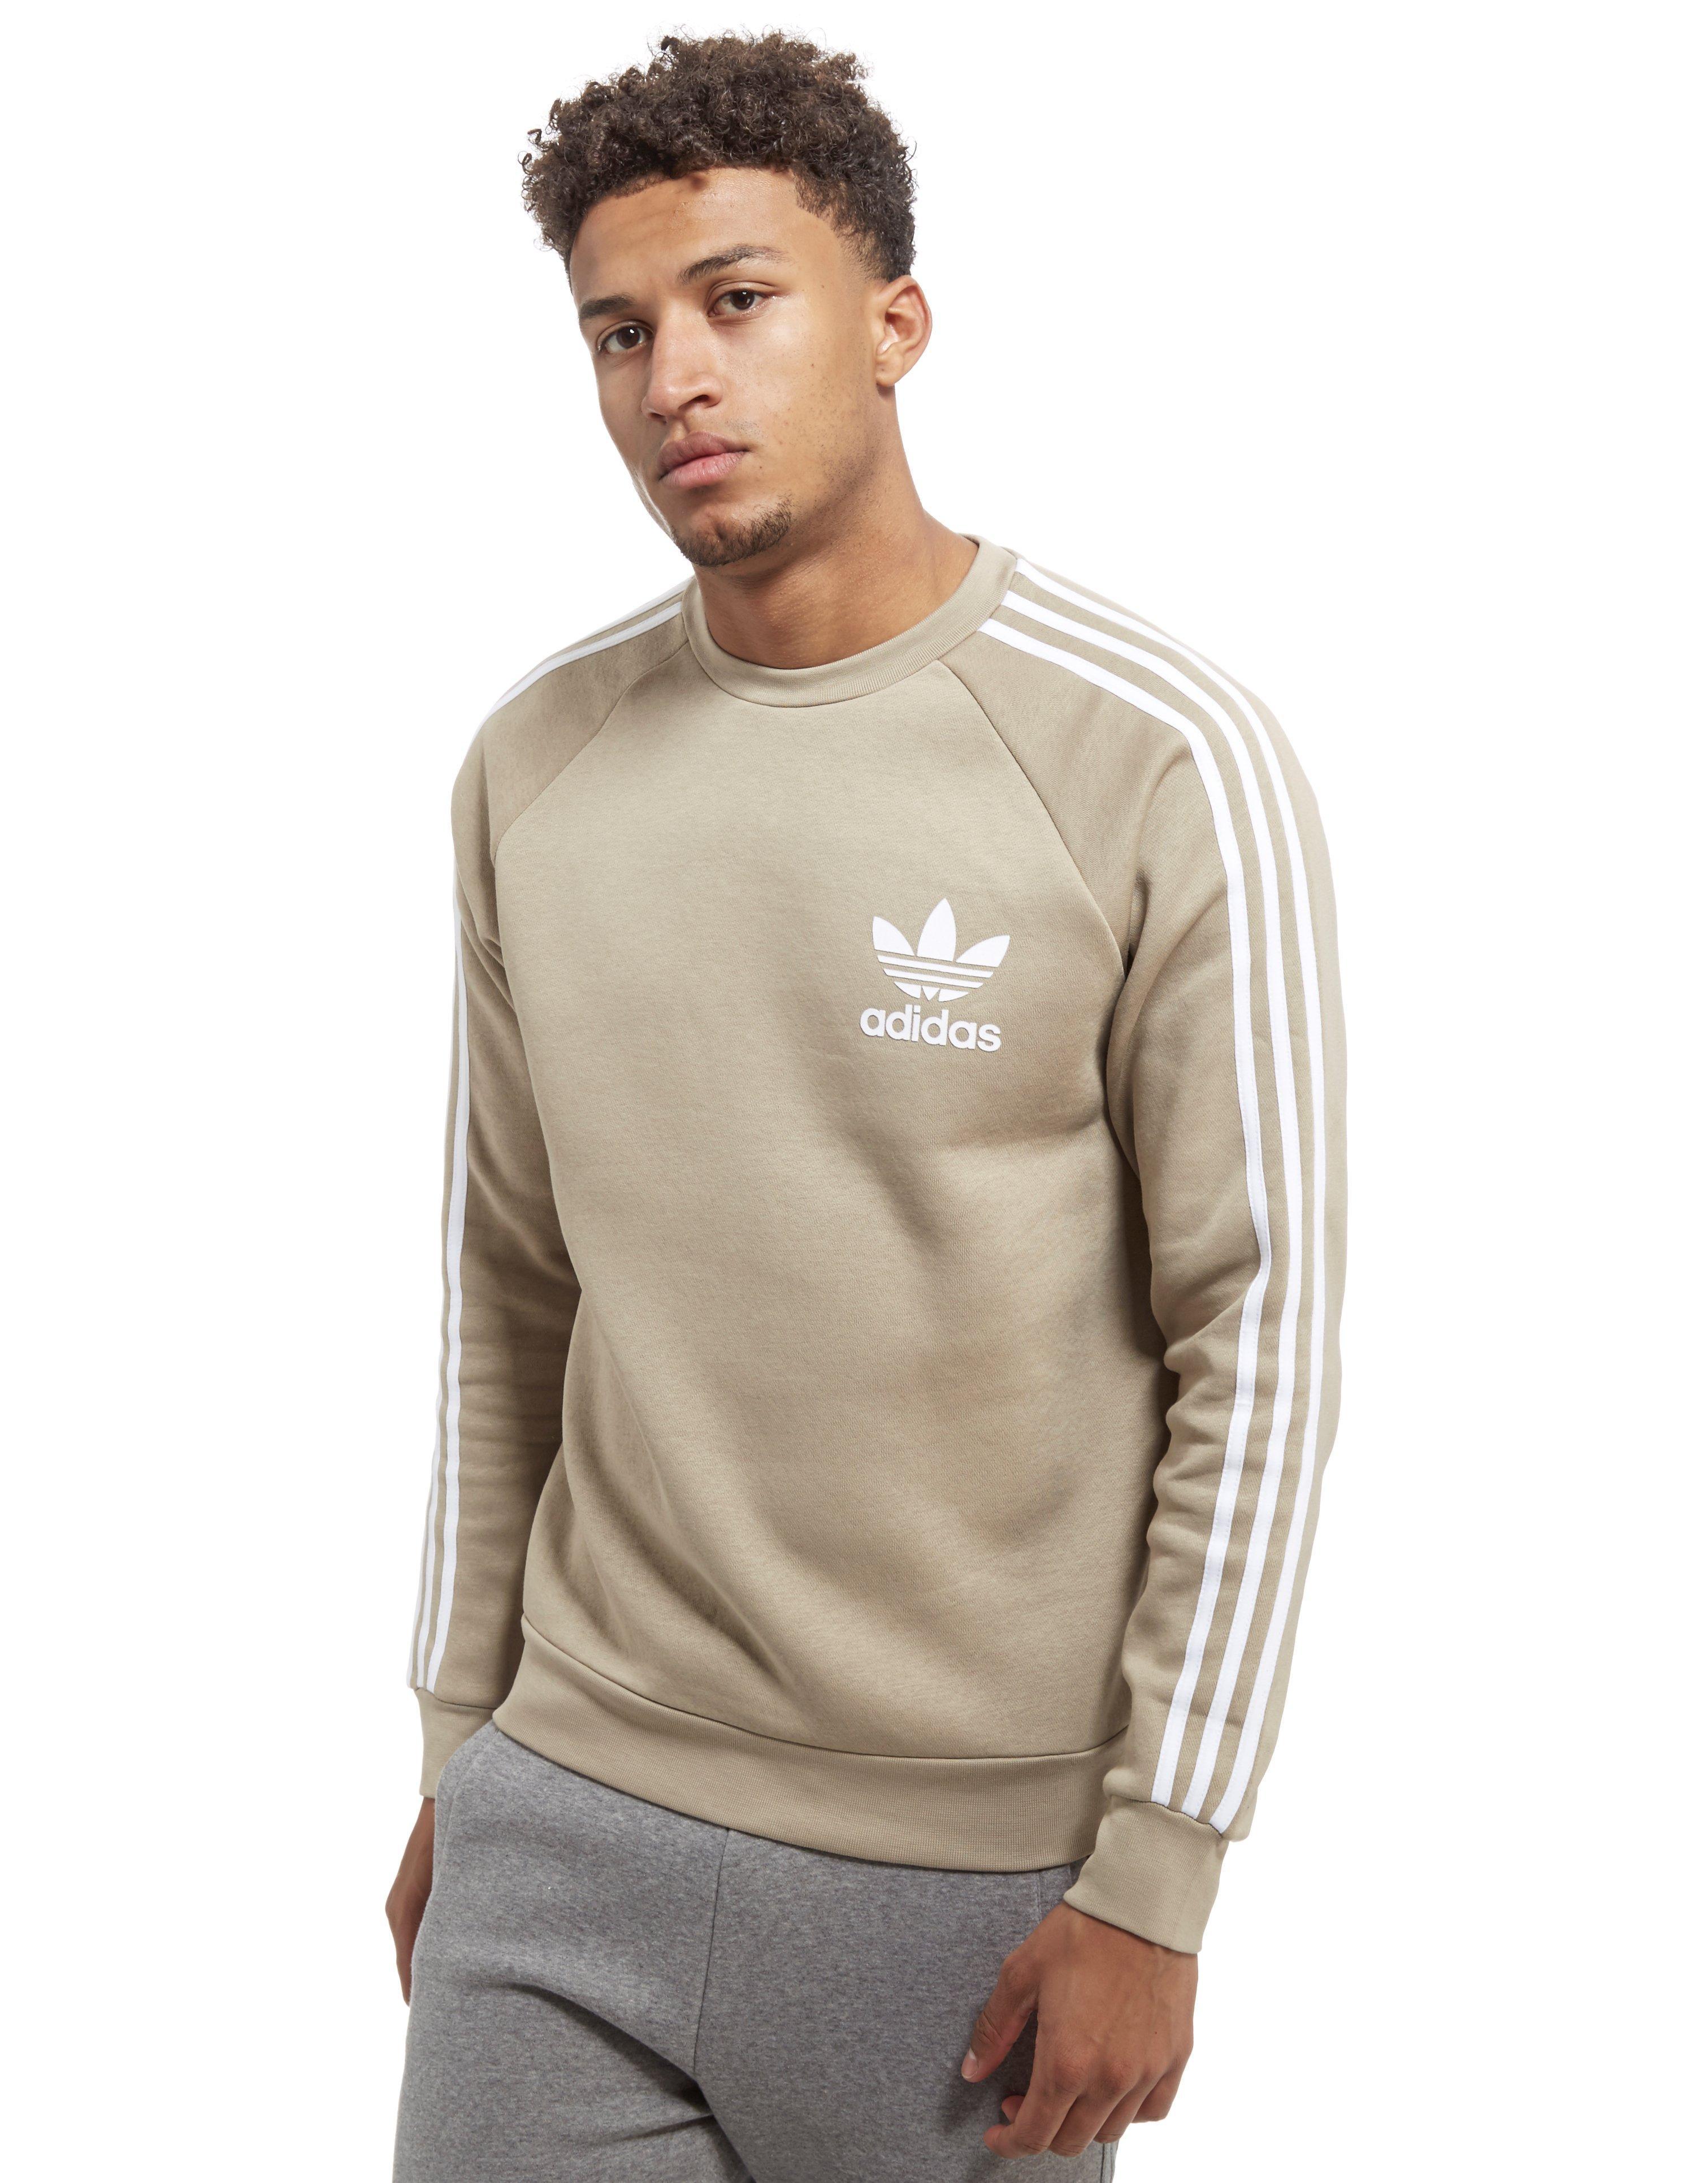 adidas originals california fast delivery and free shipping on all orders